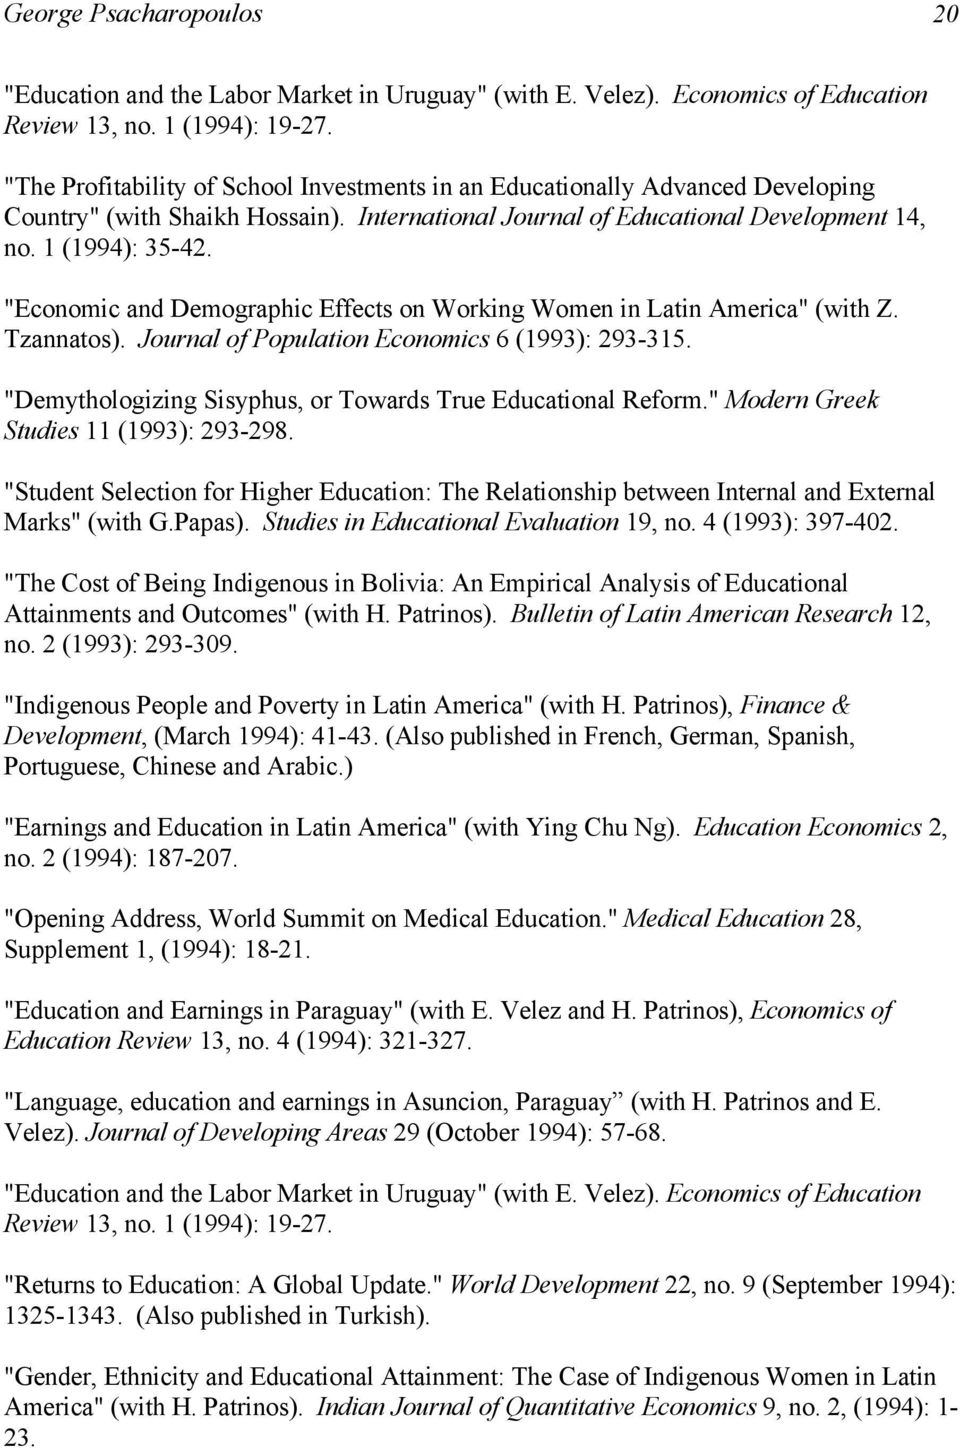 "Economic and Demographic Effects on Working Women in Latin America" (with Z. Tzannatos). Journal of Population Economics 6 (1993): 293-315.